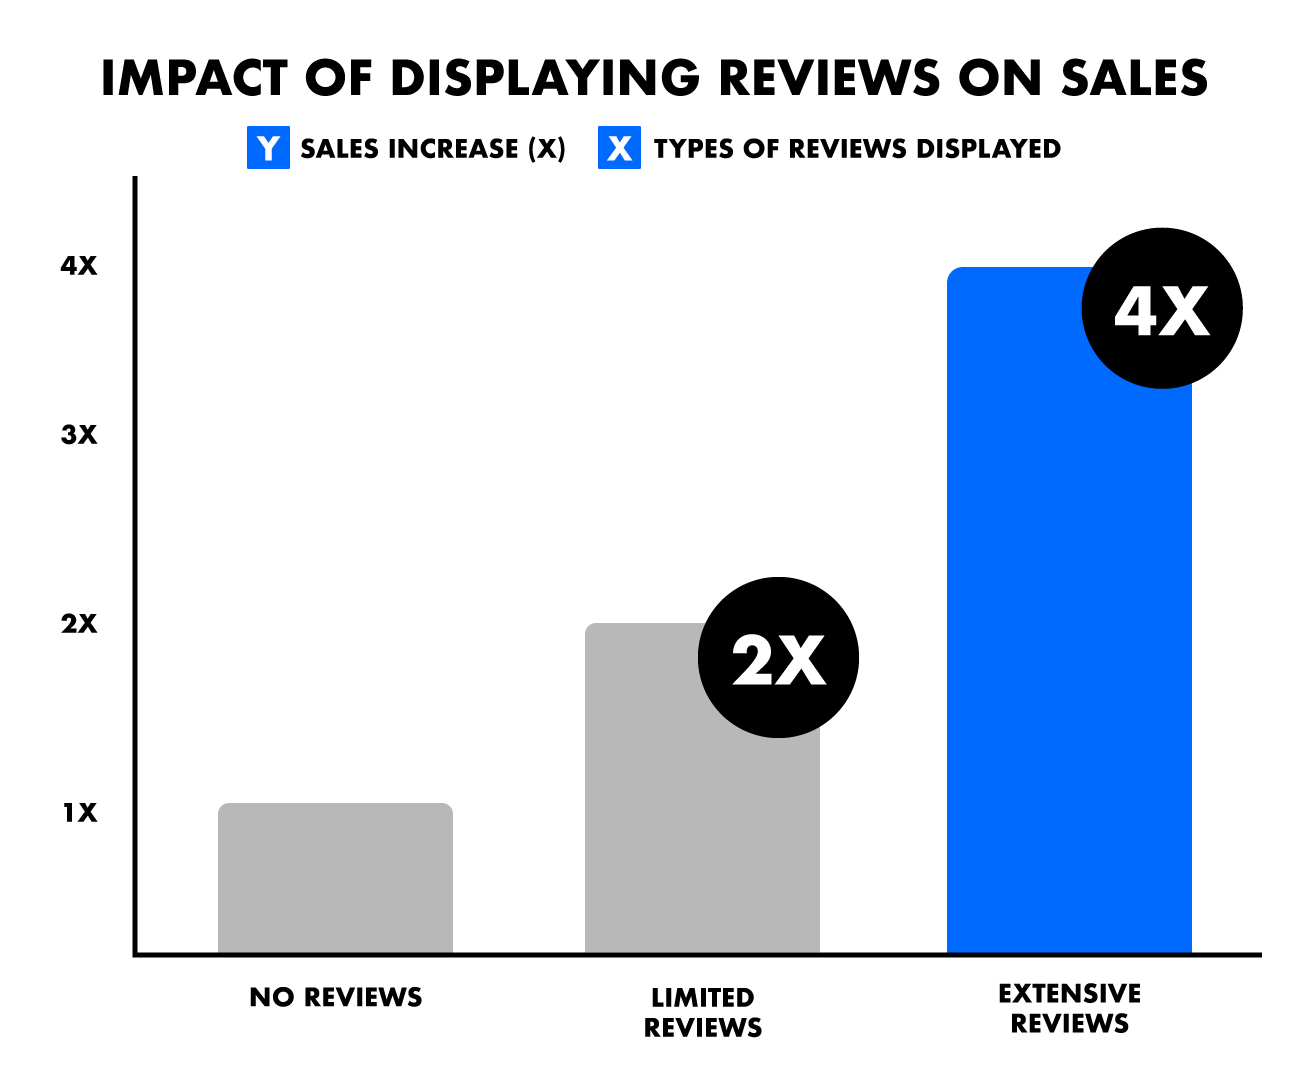 Bar chart showing the impact of displaying reviews on sales. Categories include No Reviews, Limited Reviews, and Extensive Reviews, with sales increases of 1X, 2X, and 4X respectively.